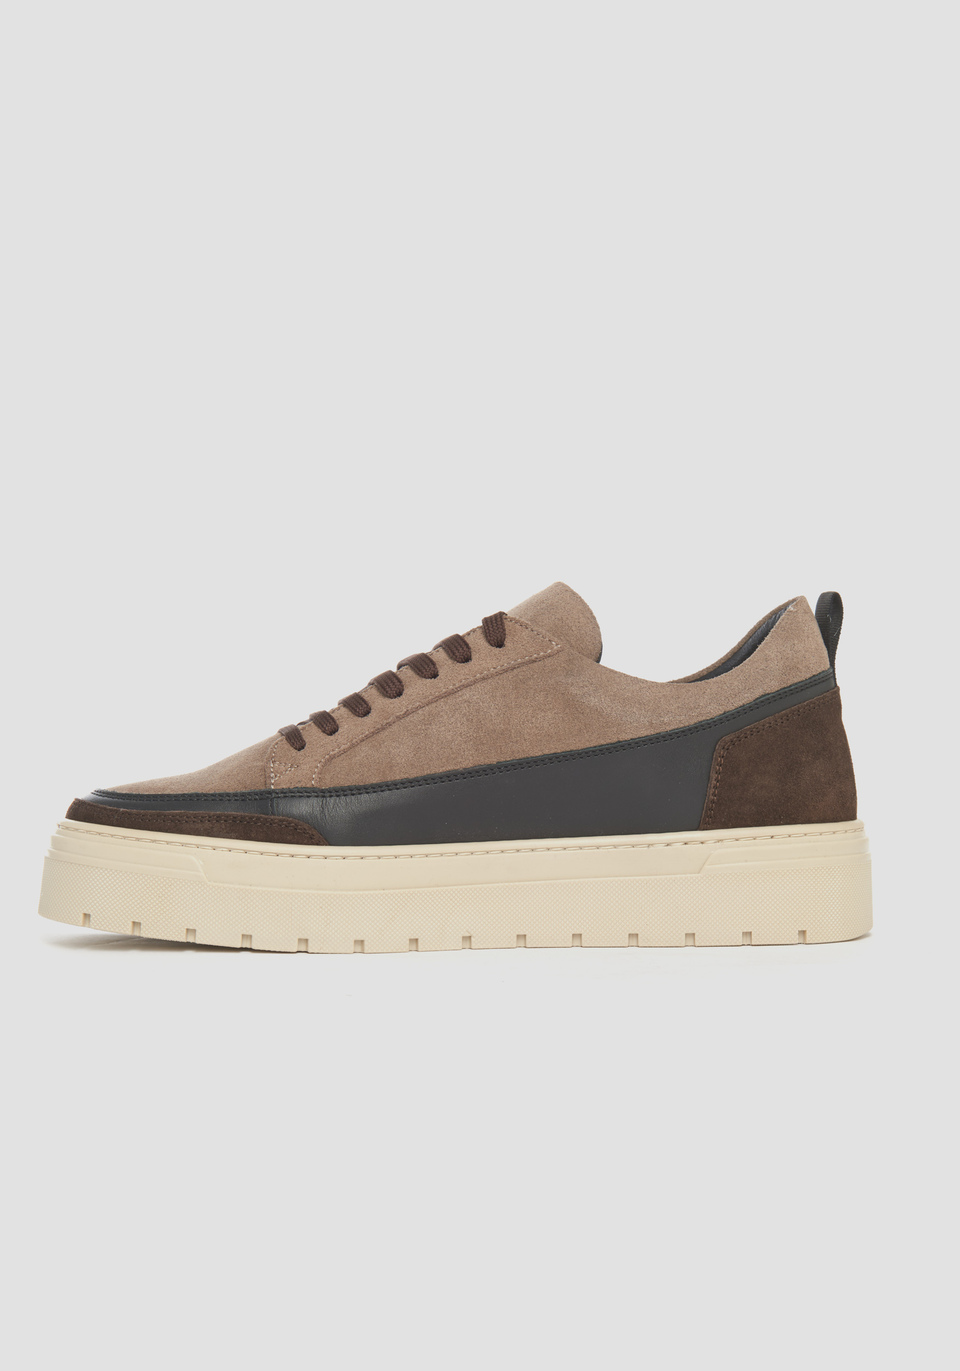 "FLINT" SNEAKERS IN SUEDE WITH LEATHER DETAILS - Antony Morato Online Shop